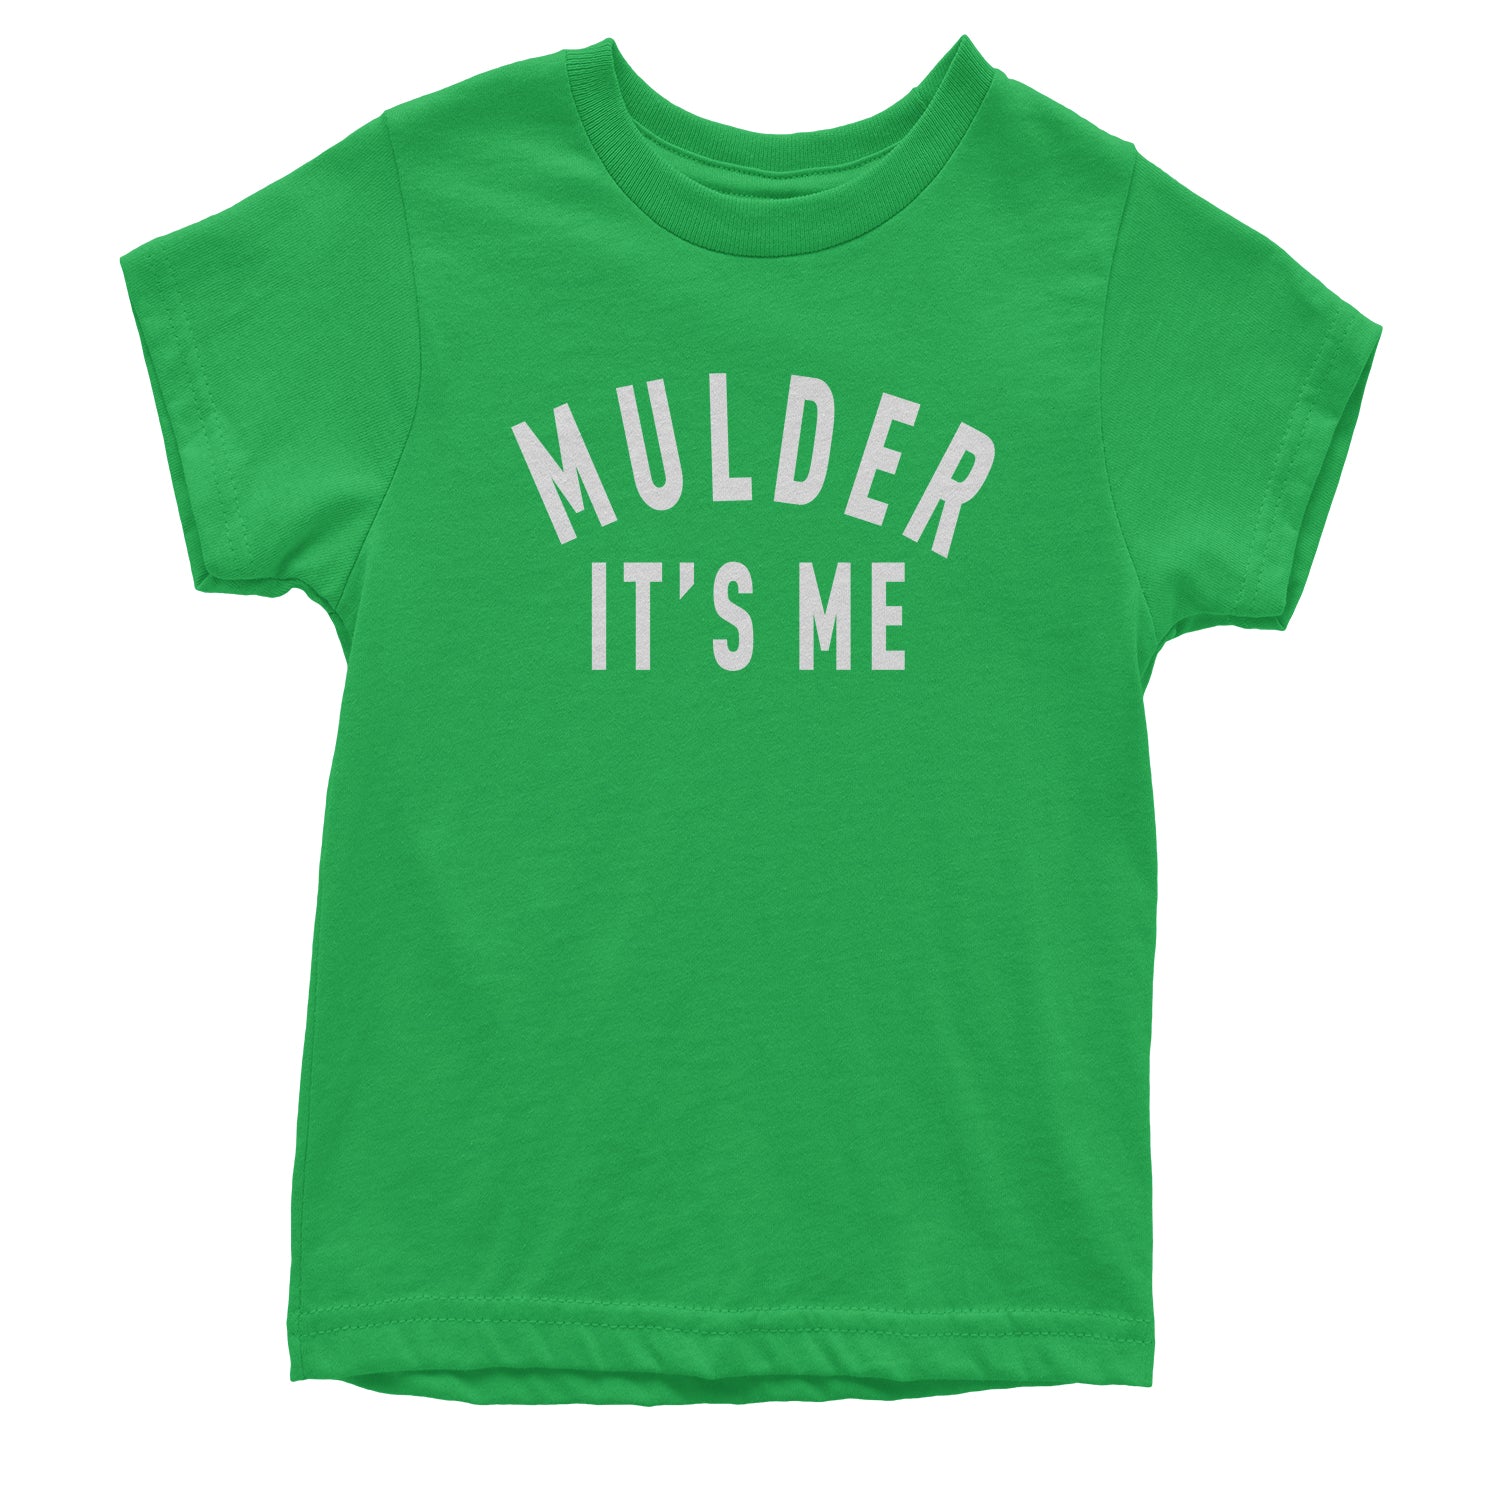 Mulder, It's Me Youth T-shirt 51, area, believe, files, is, mulder, out, scully, the, there, truth, x, xfiles by Expression Tees